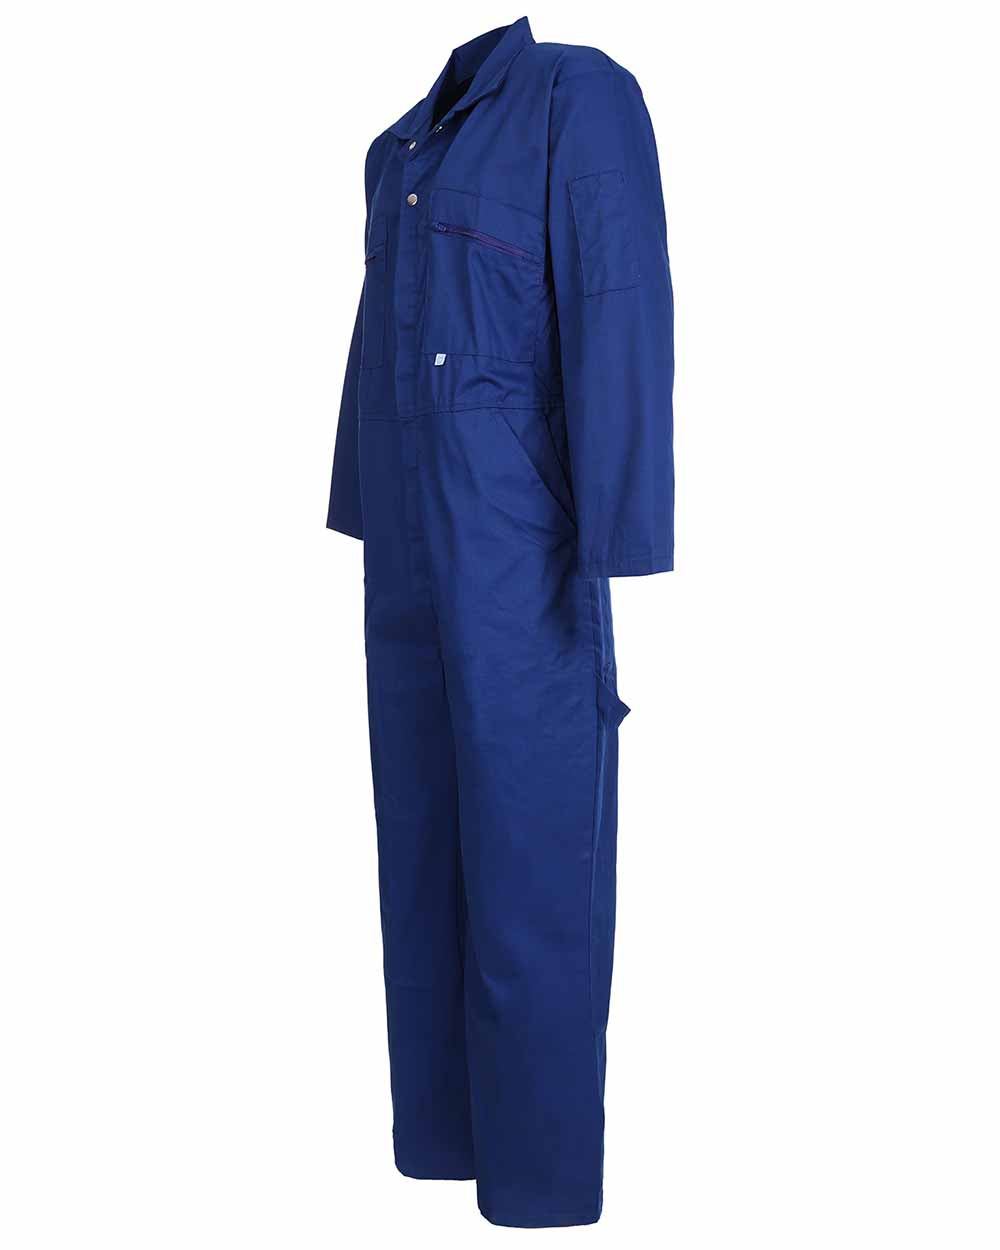 Chest pockets with zips on Fort Zip Front Boilersuit in Royal Blue 